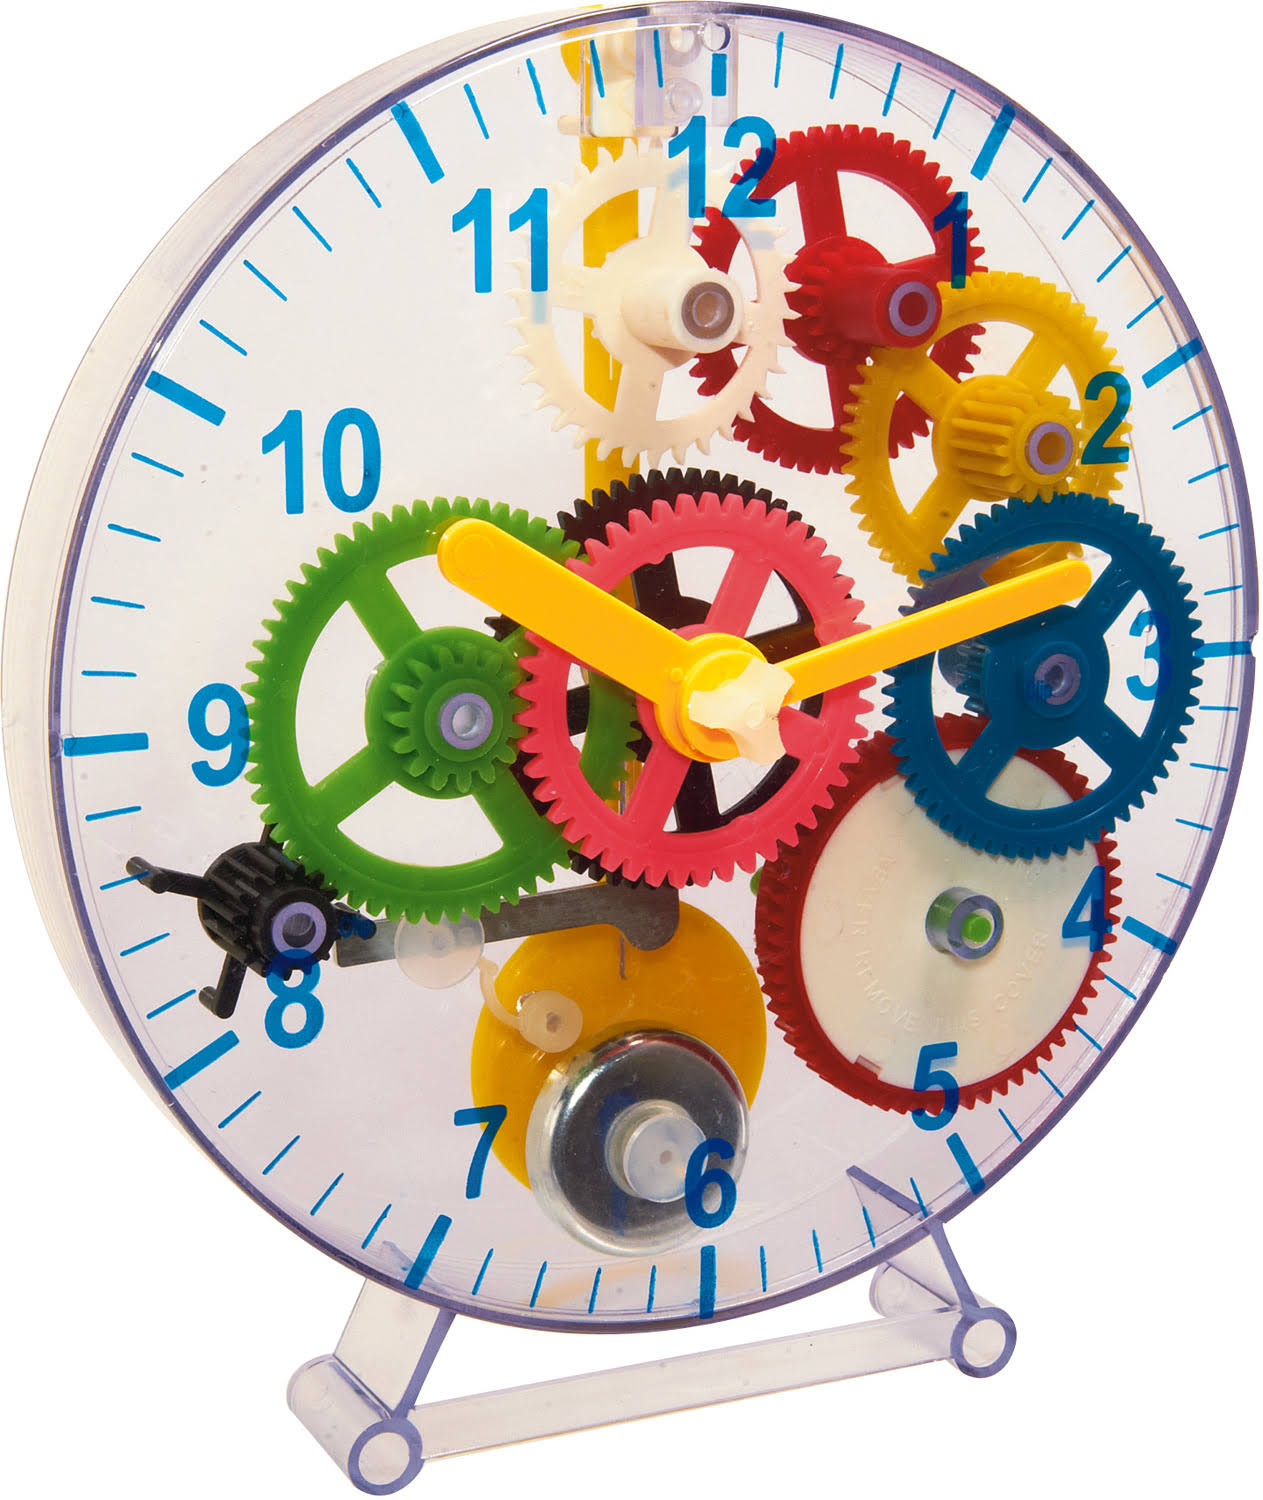 Construct-a-clock Toy